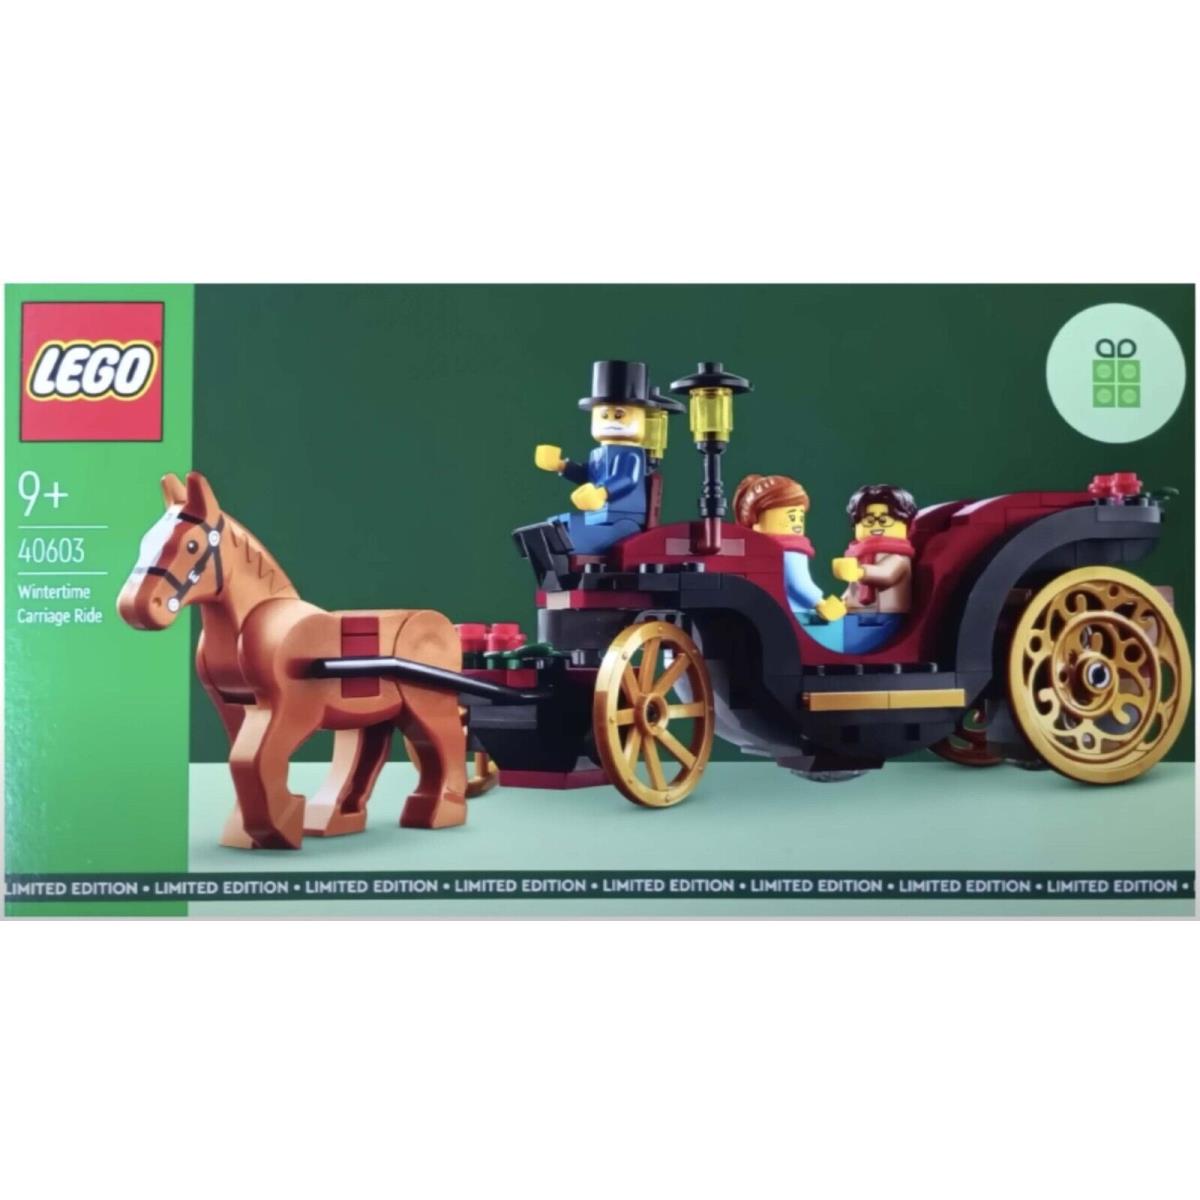 Lego Wintertime Carriage Ride 40603 Christmas Set Ship in Extra Box